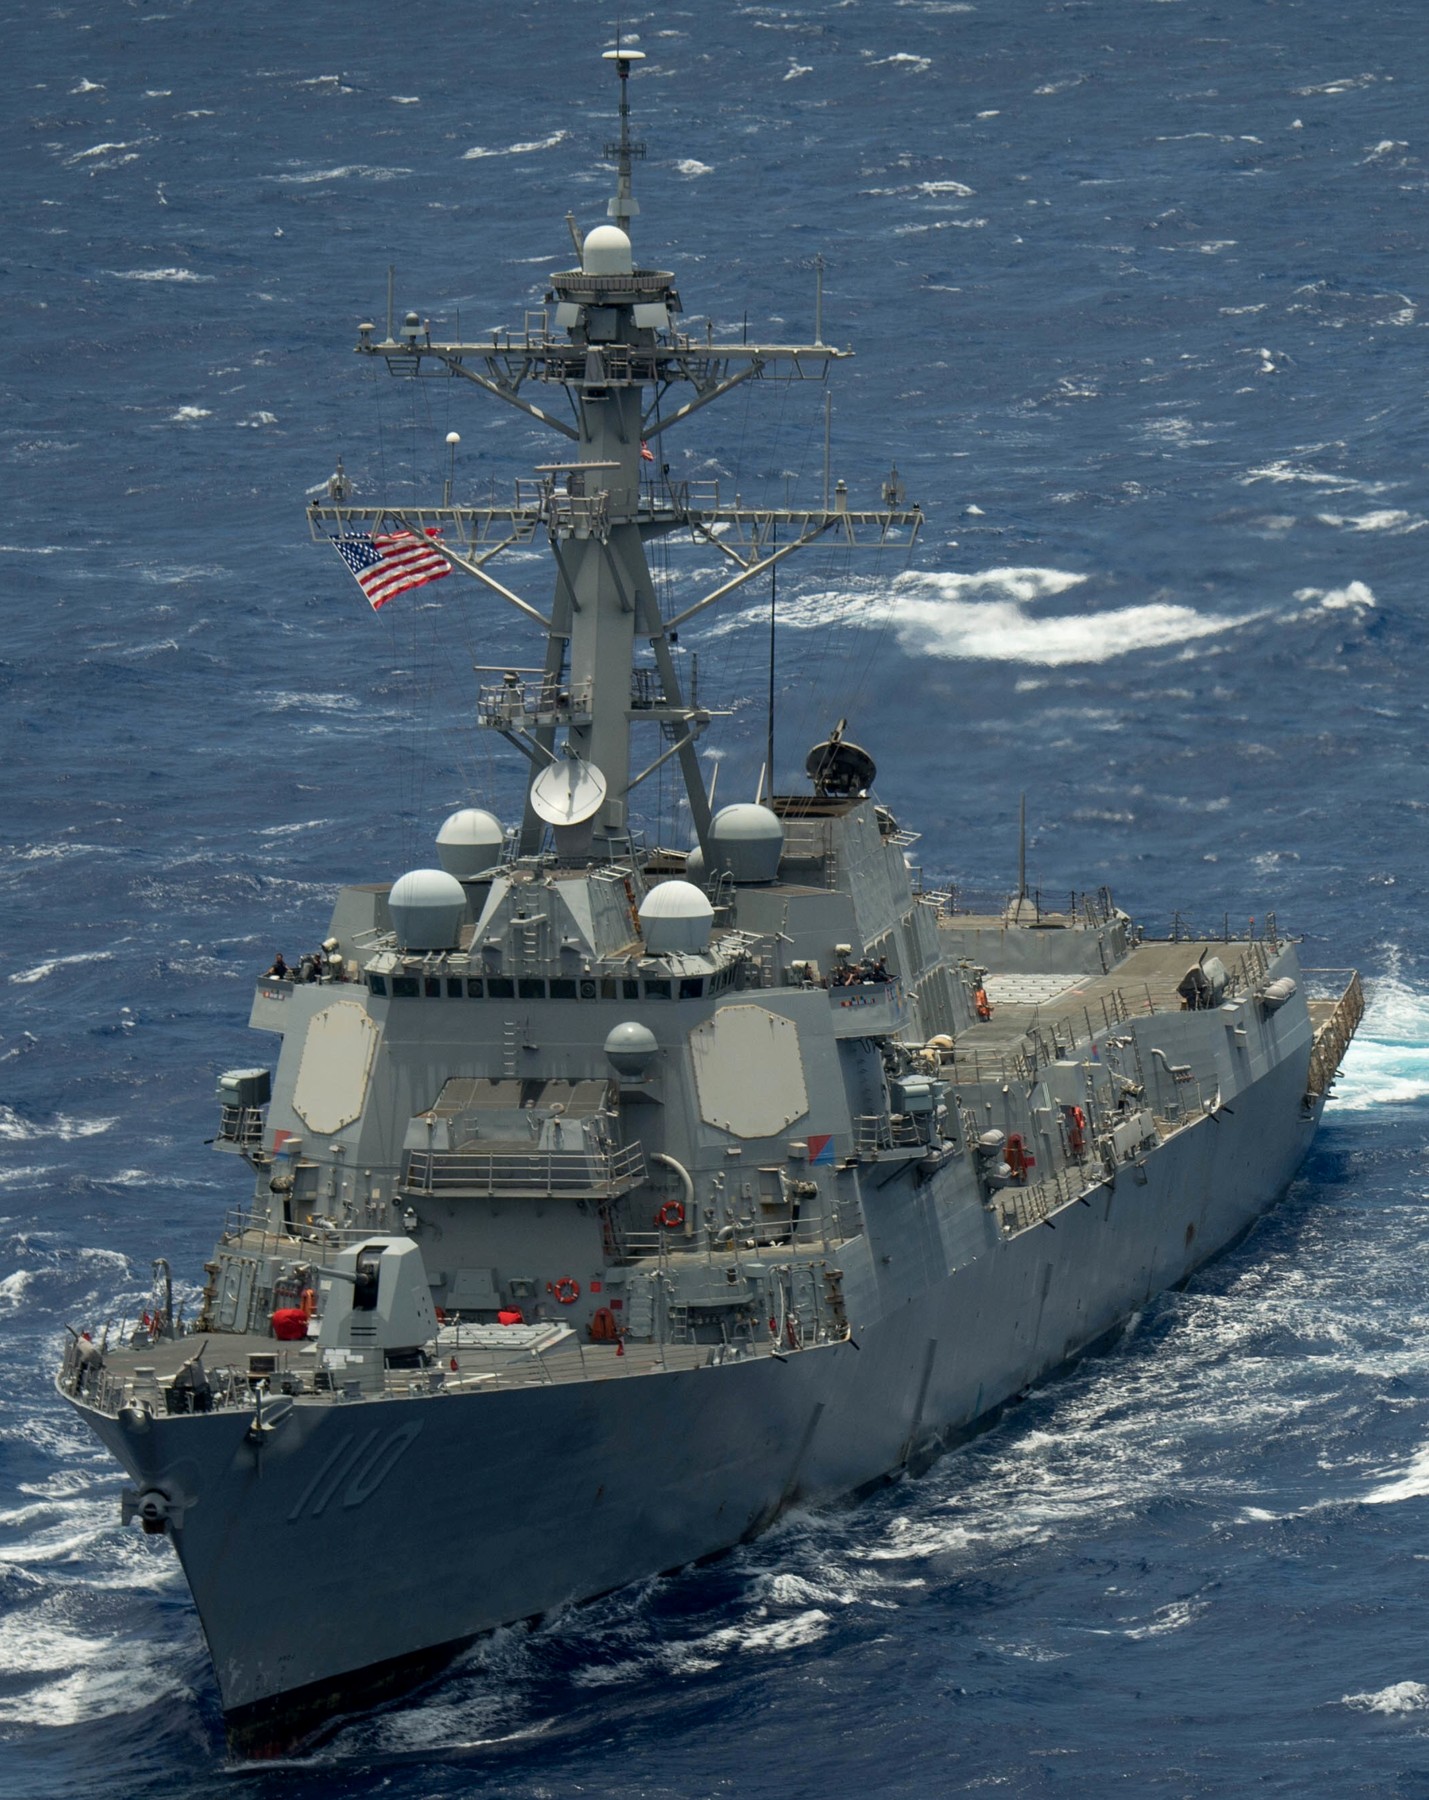 ddg-110 uss william p. lawrence arleigh burke class guided missile destroyer aegis us navy 29